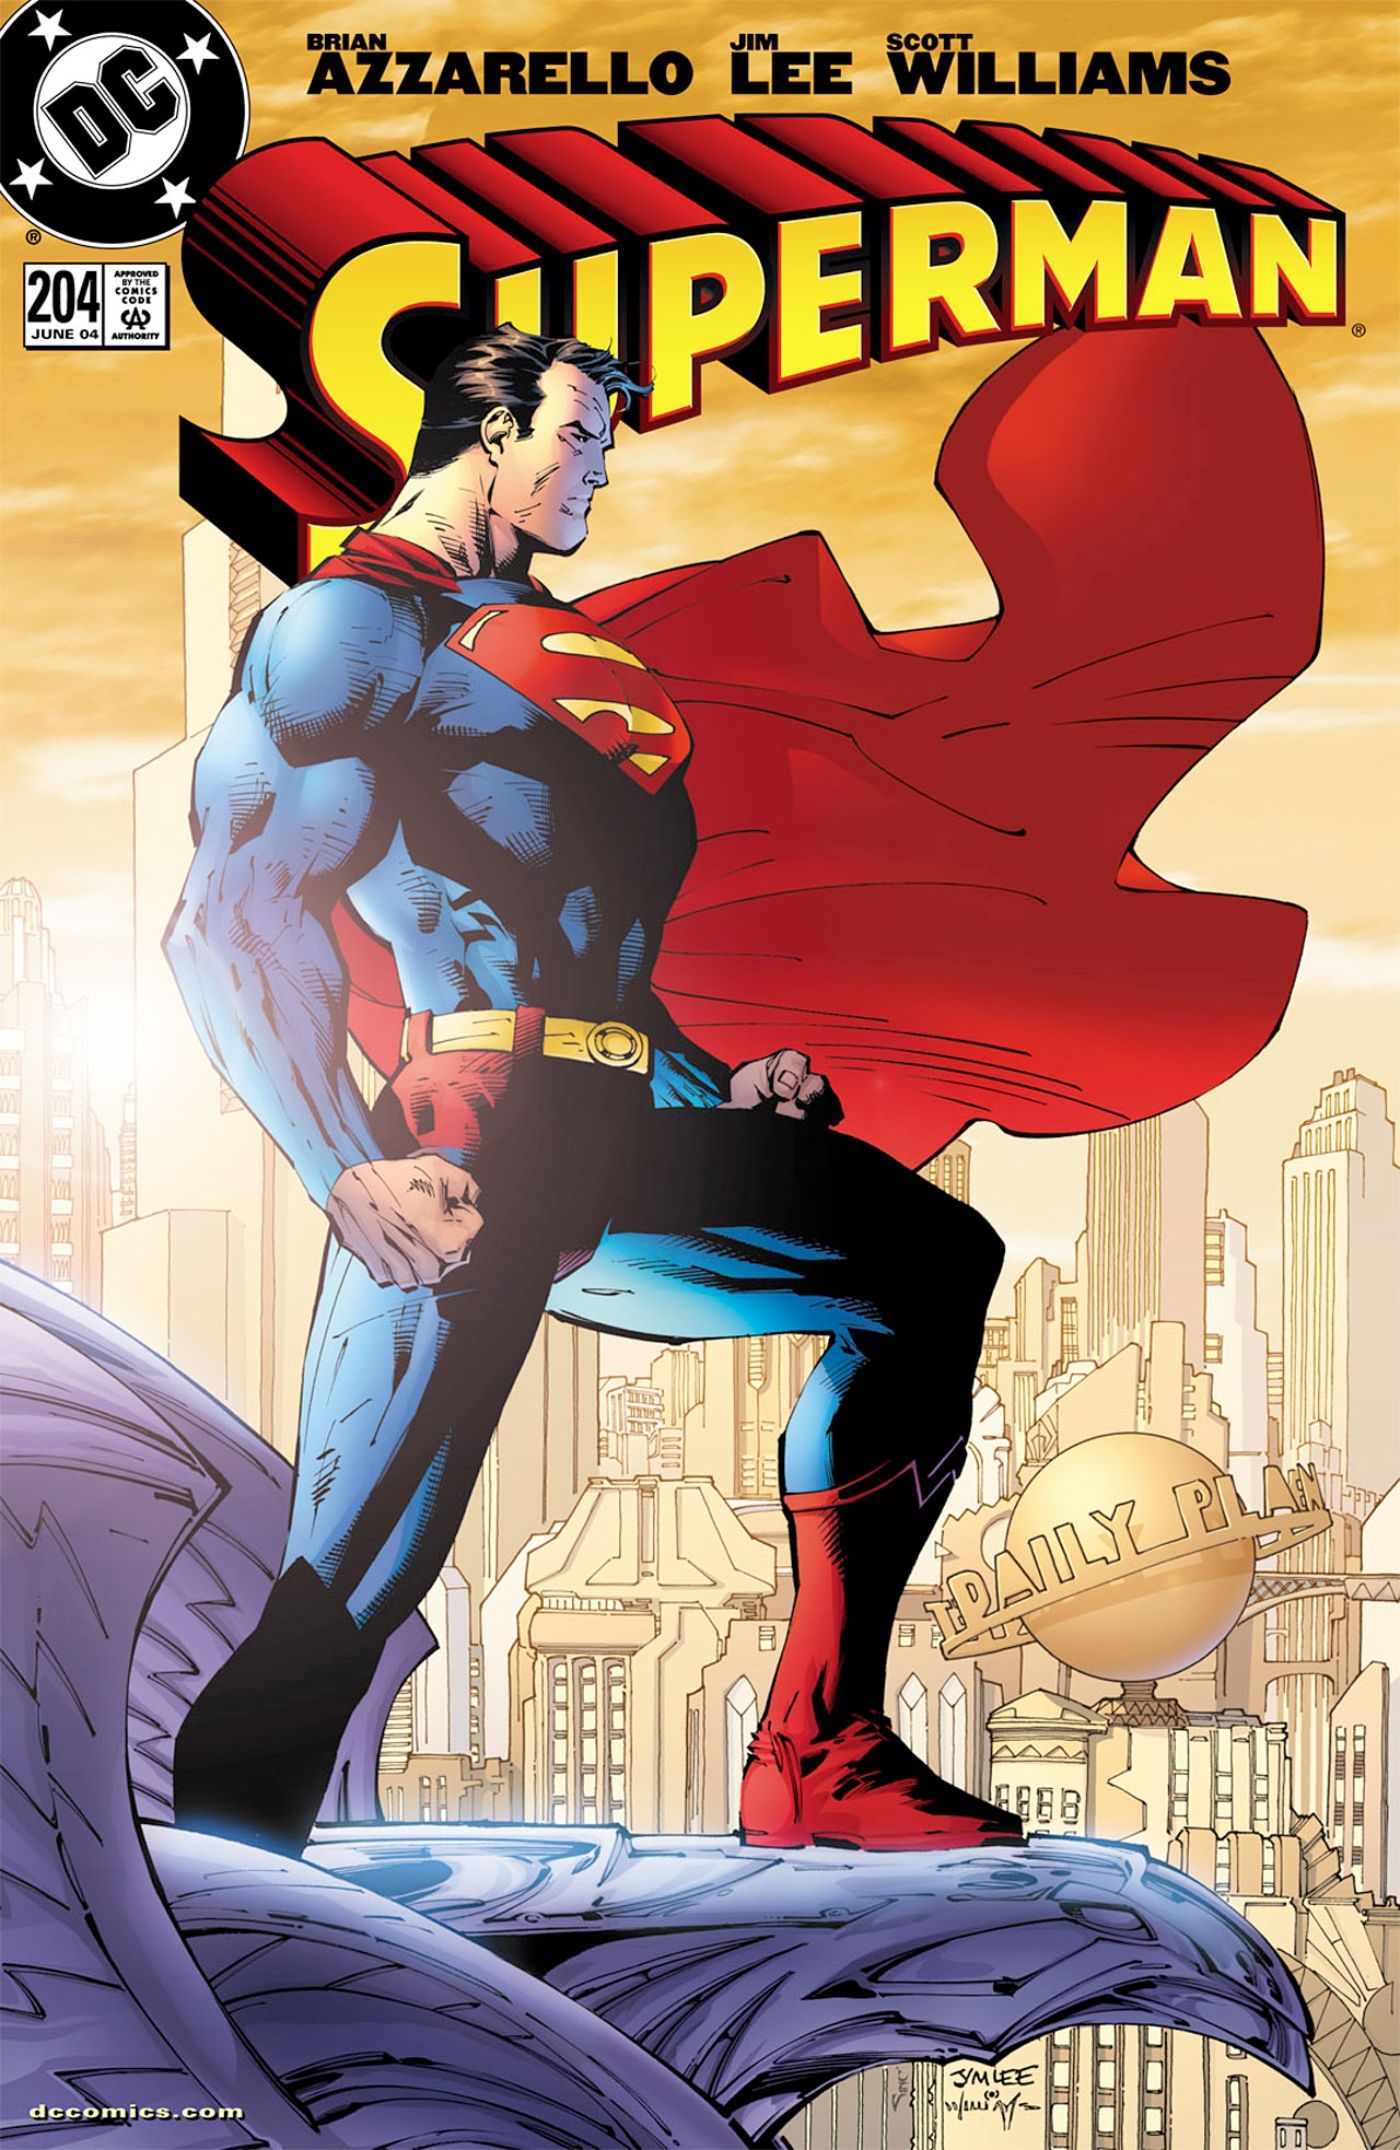 Superman watching over Metropolis on a comic cover.